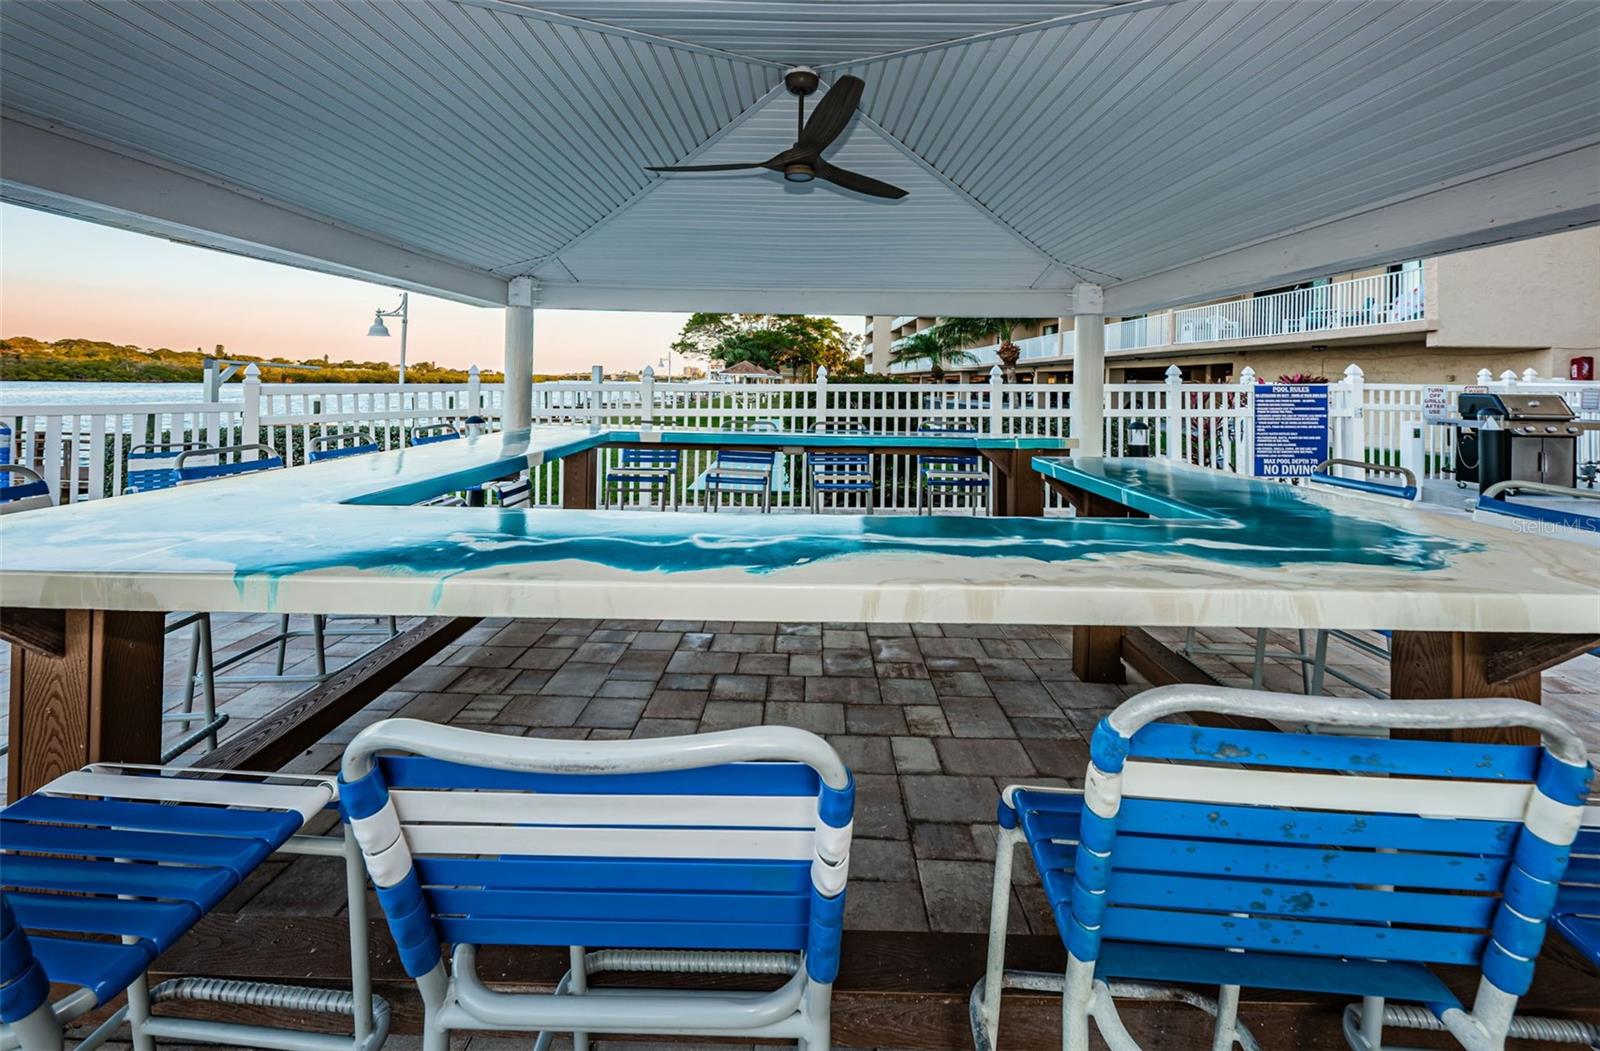 Relax poolside with your friends and family at the newly renovated Outdoor Bar & Lanai